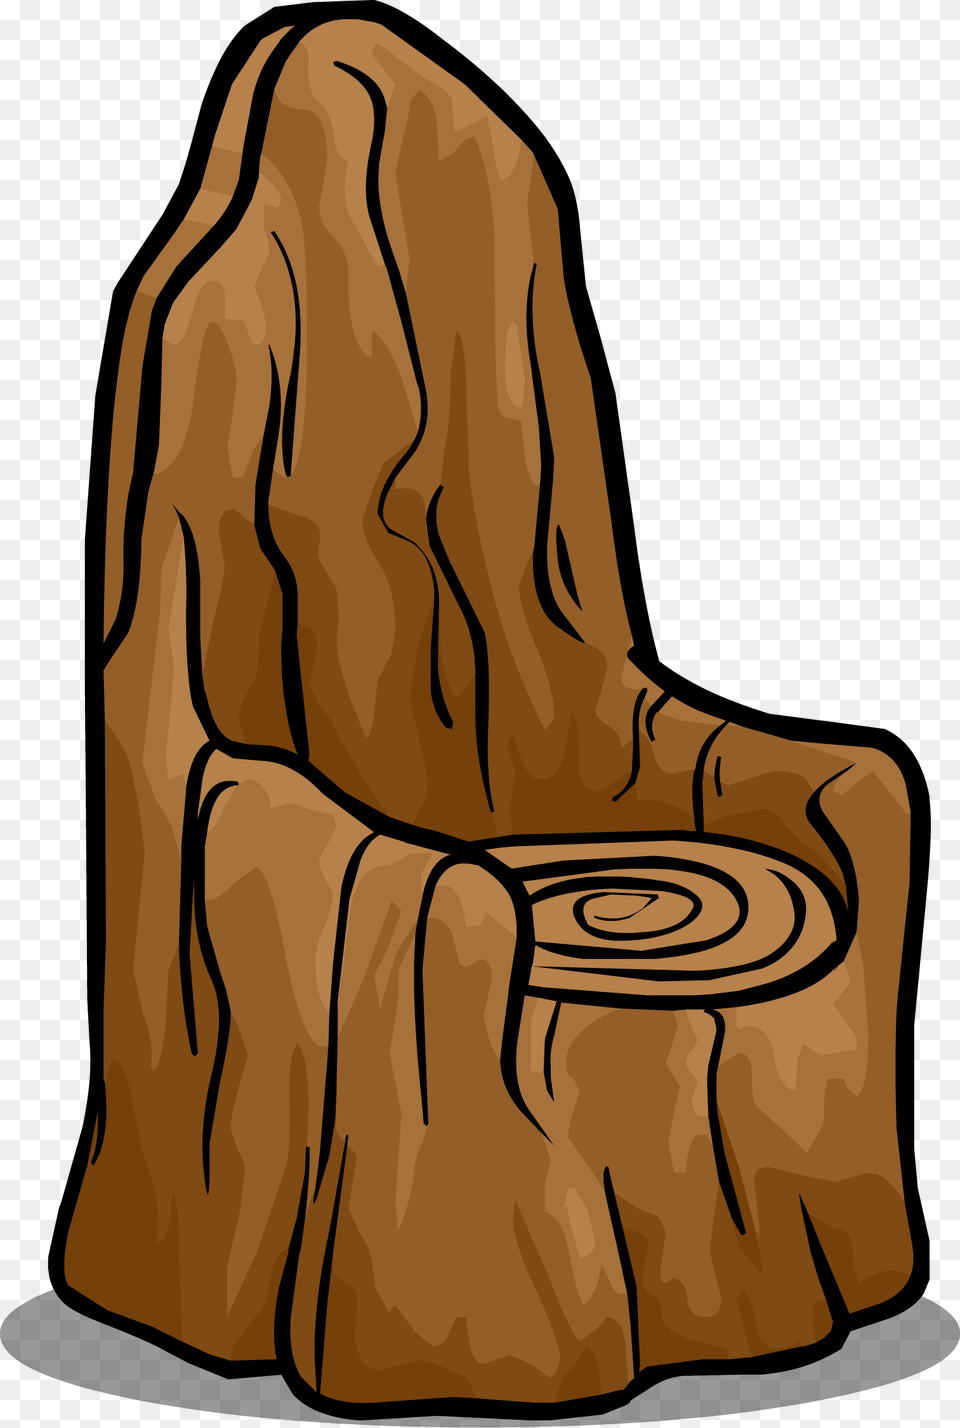 Tree Stump Chair Sprite Tree Chair Clipart, Plant, Tree Stump, Adult, Female Free Transparent Png